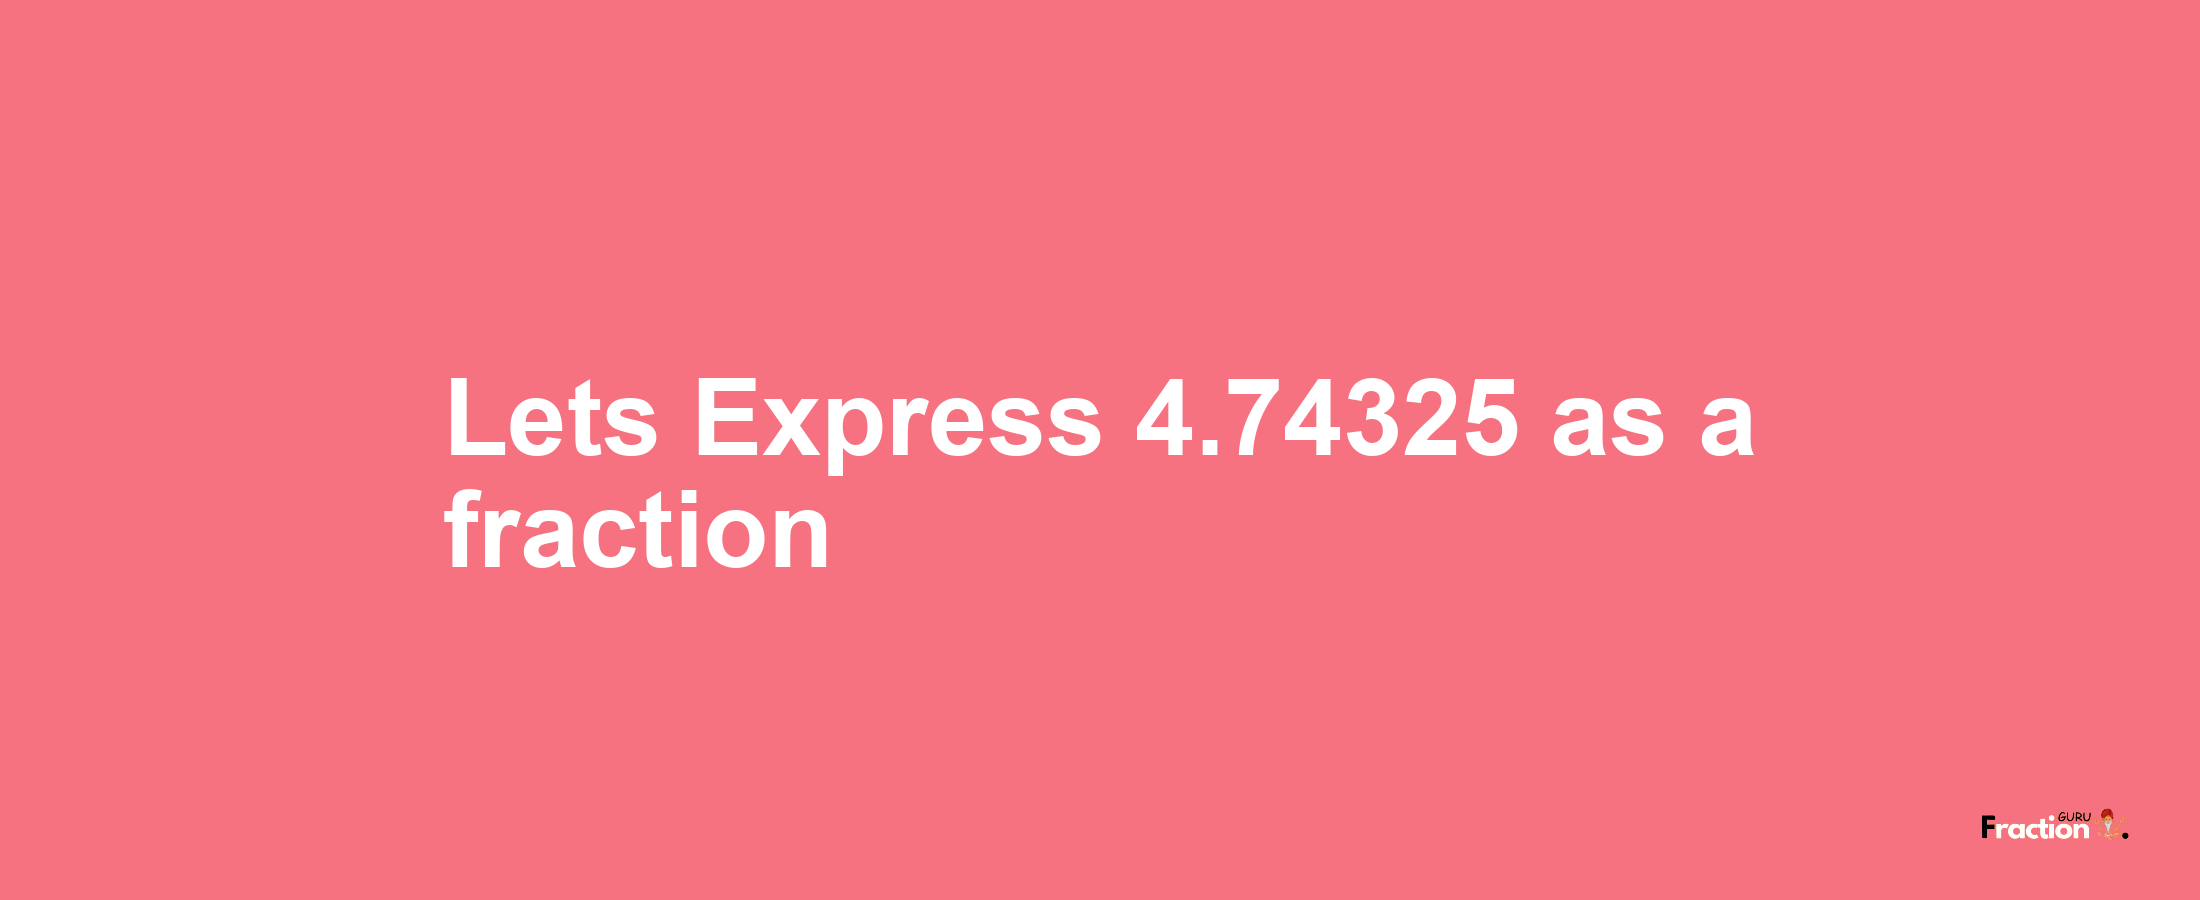 Lets Express 4.74325 as afraction